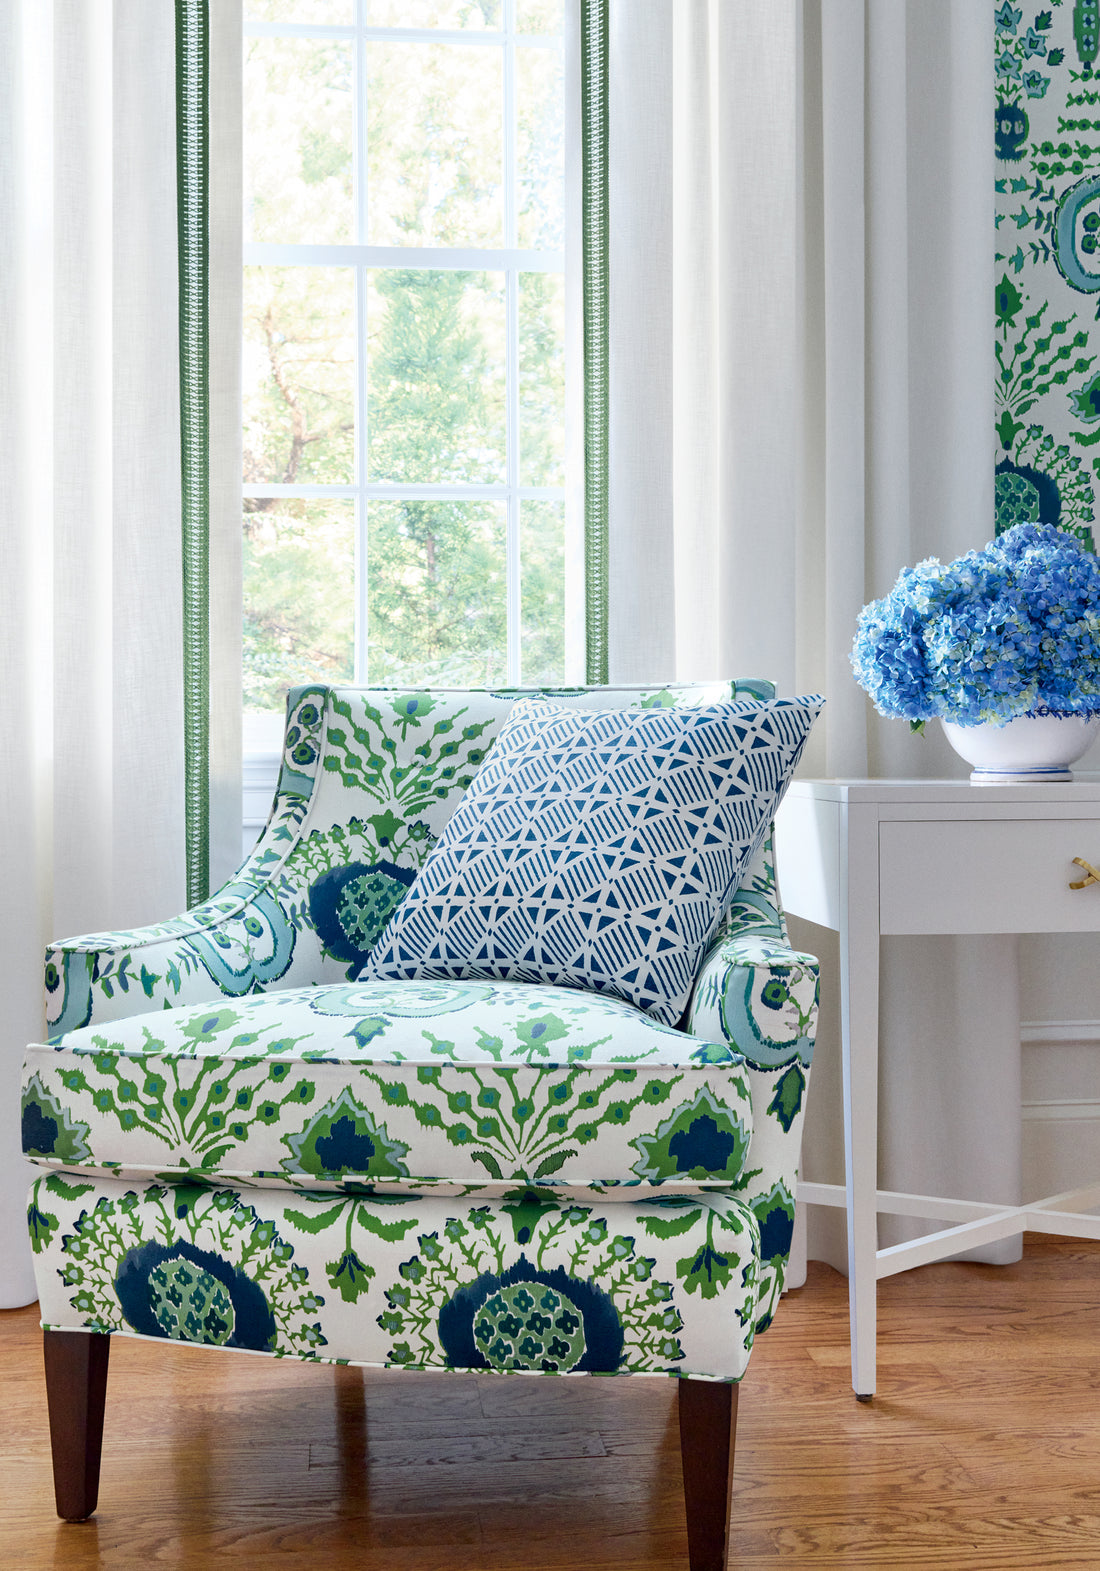 Emerson Chair in Mendoza Suzani fabric in blue and green on white color - pattern number F916240 - by Thibaut in the Kismet collection